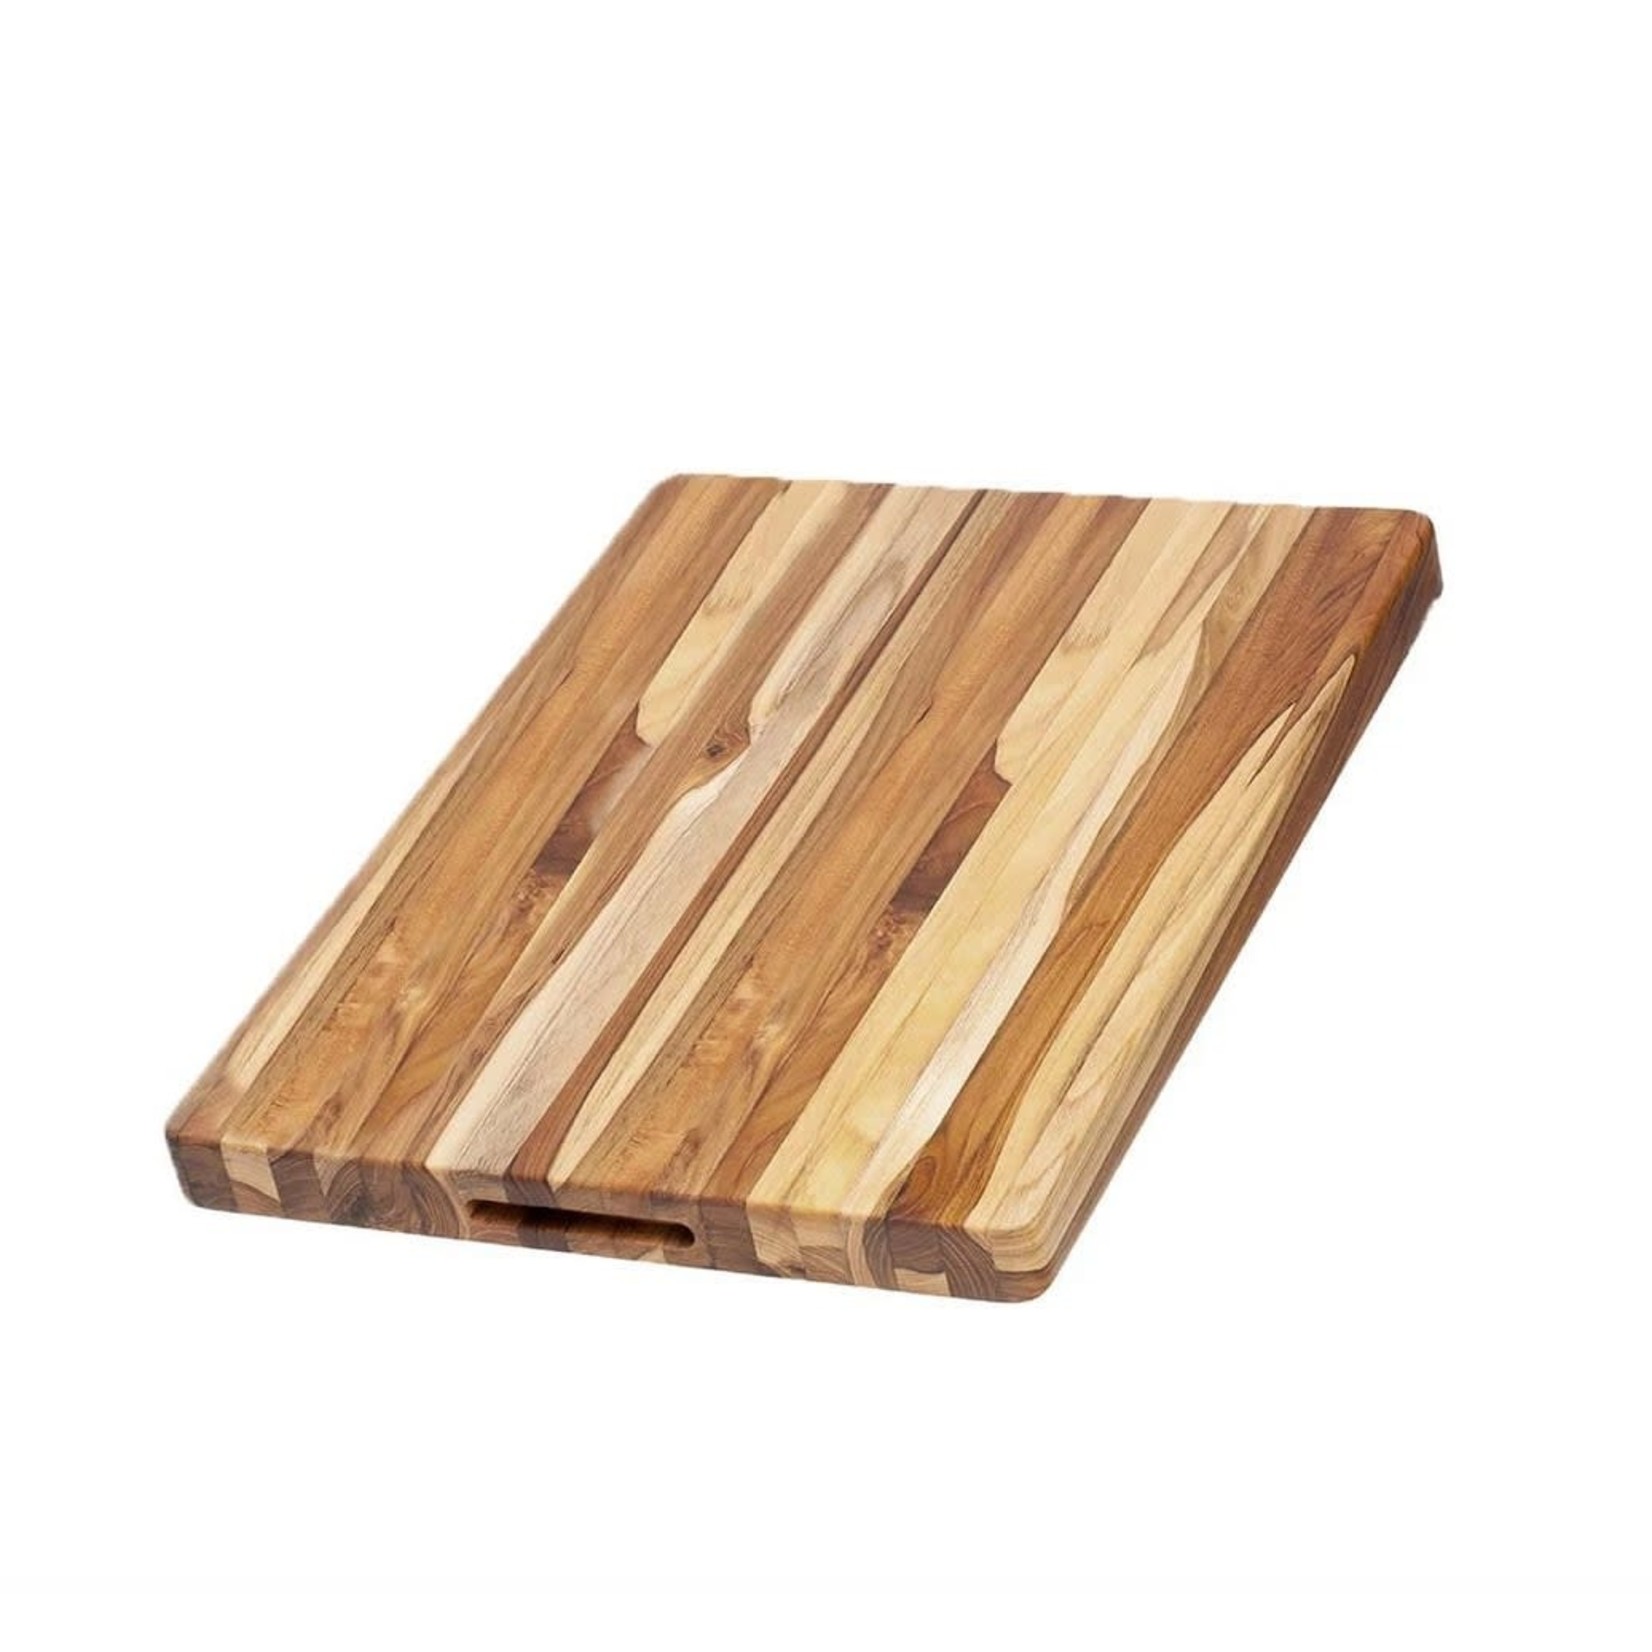 TEAKHAUS TEAKHAUS Carving / Cutting Board with Hand Grip 20x15”